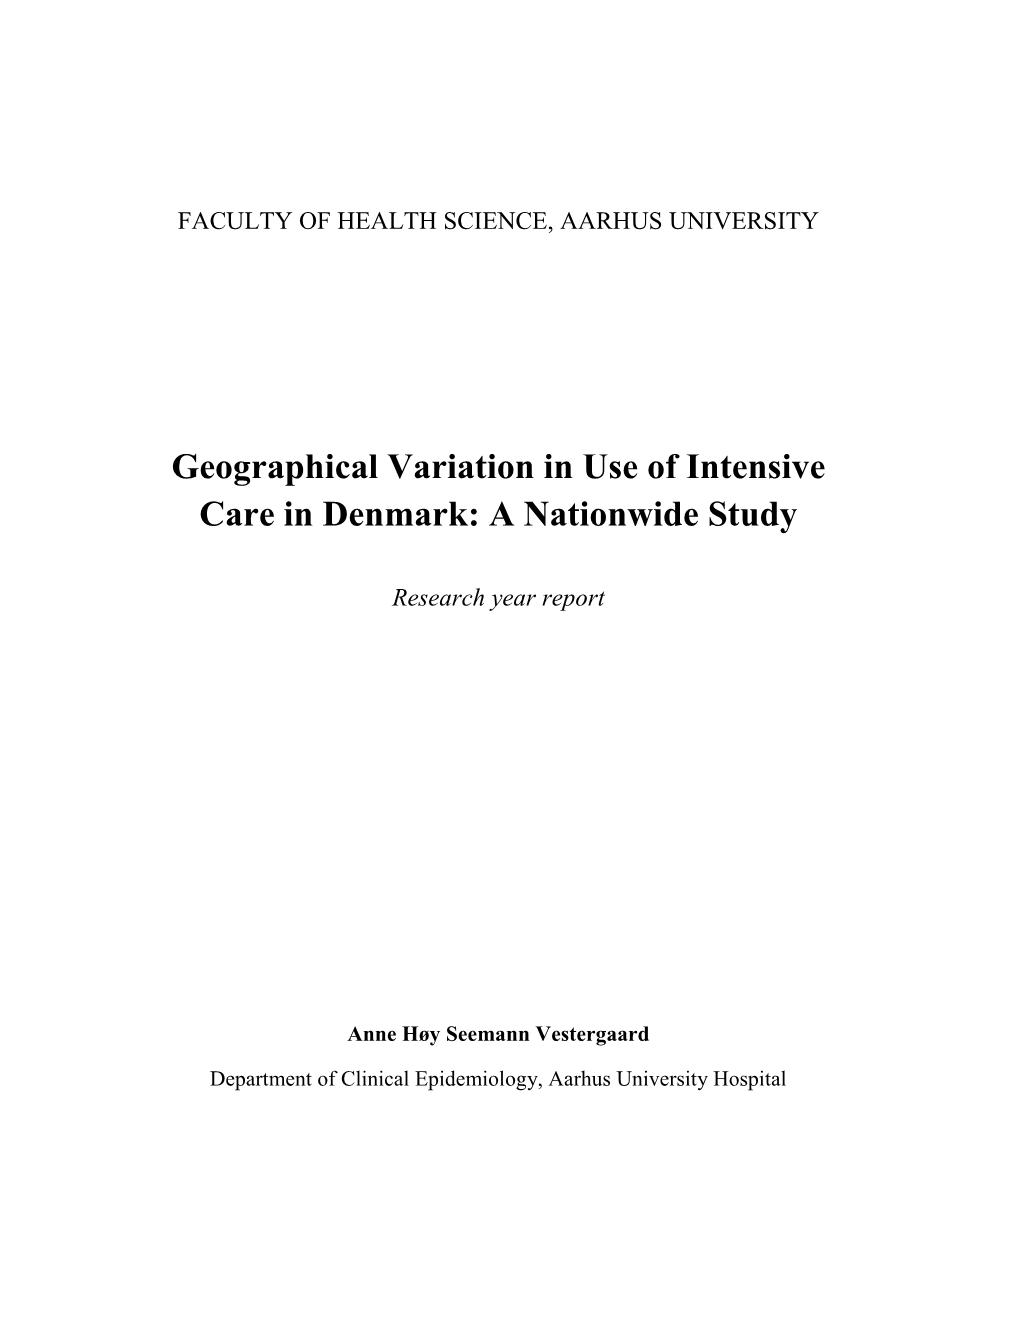 Geographical Variation in Use of Intensive Care in Denmark: a Nationwide Study